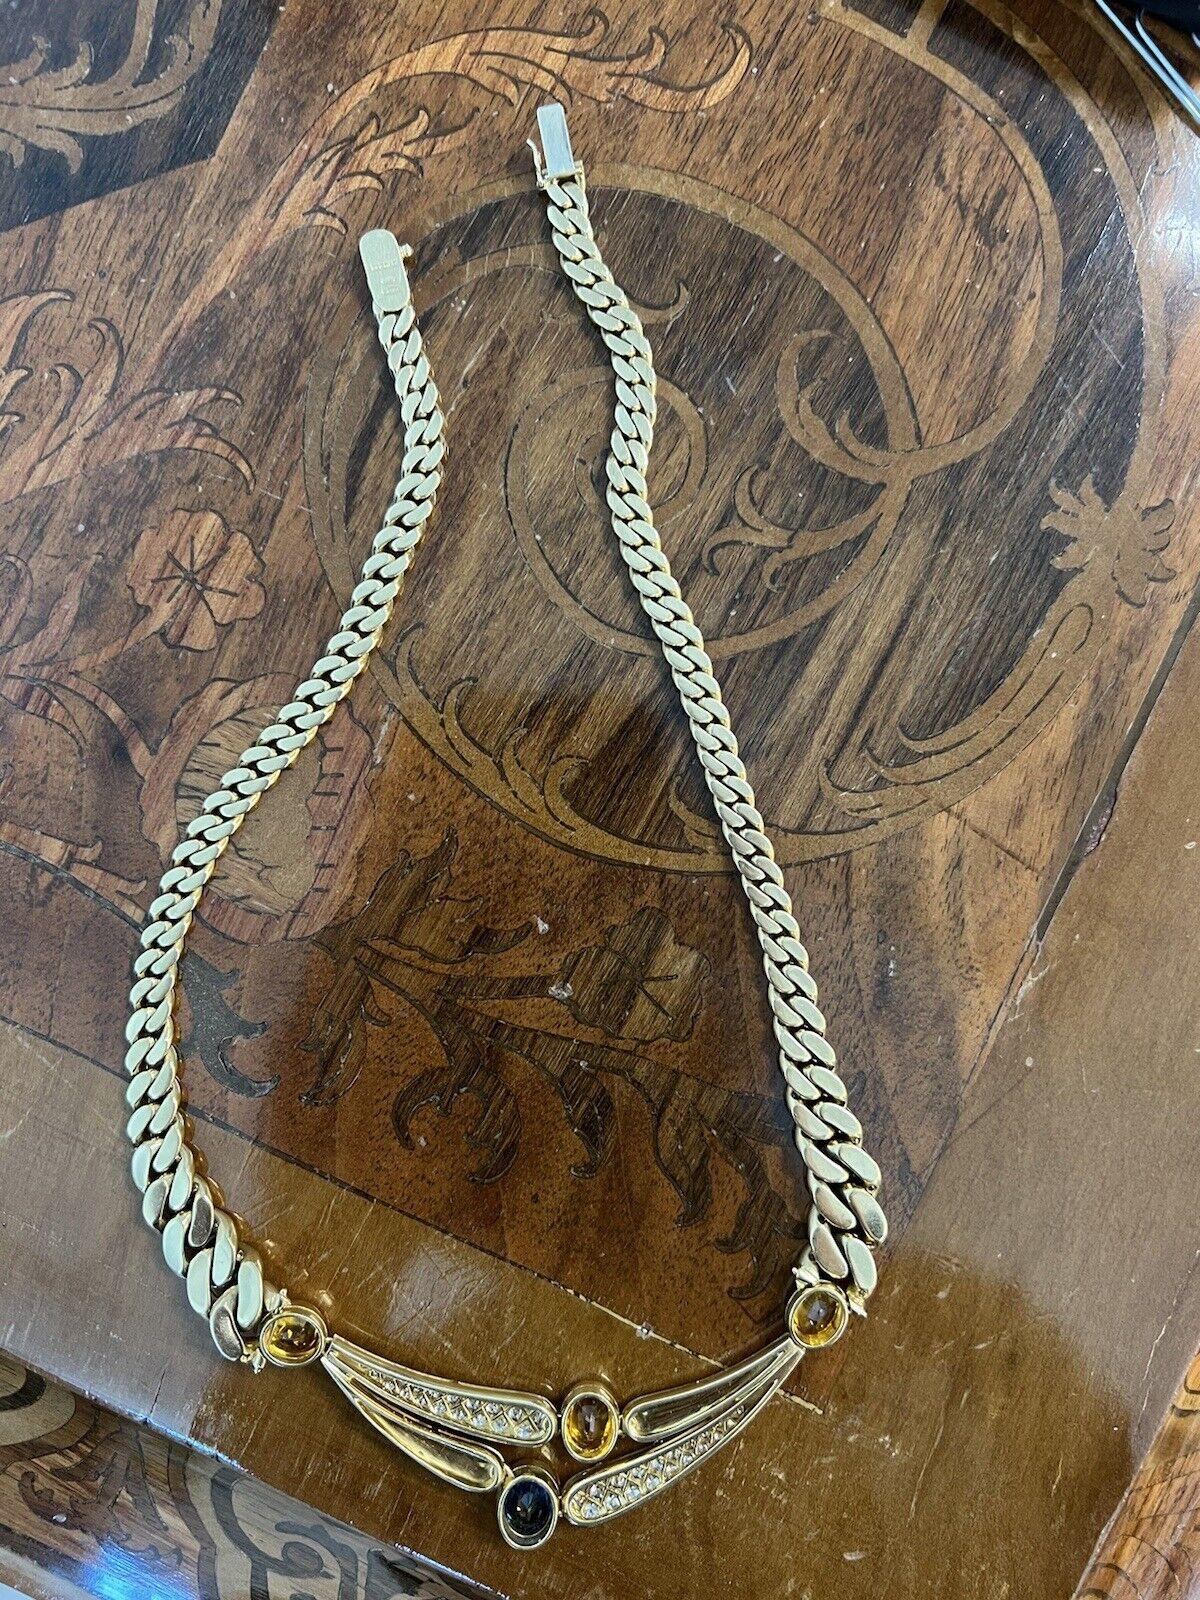 BVLGARI Italy 18k YG, Diamond, Blue & Yellow Sapphire Curb Link Necklace 1970s In Excellent Condition For Sale In Beverly Hills, CA